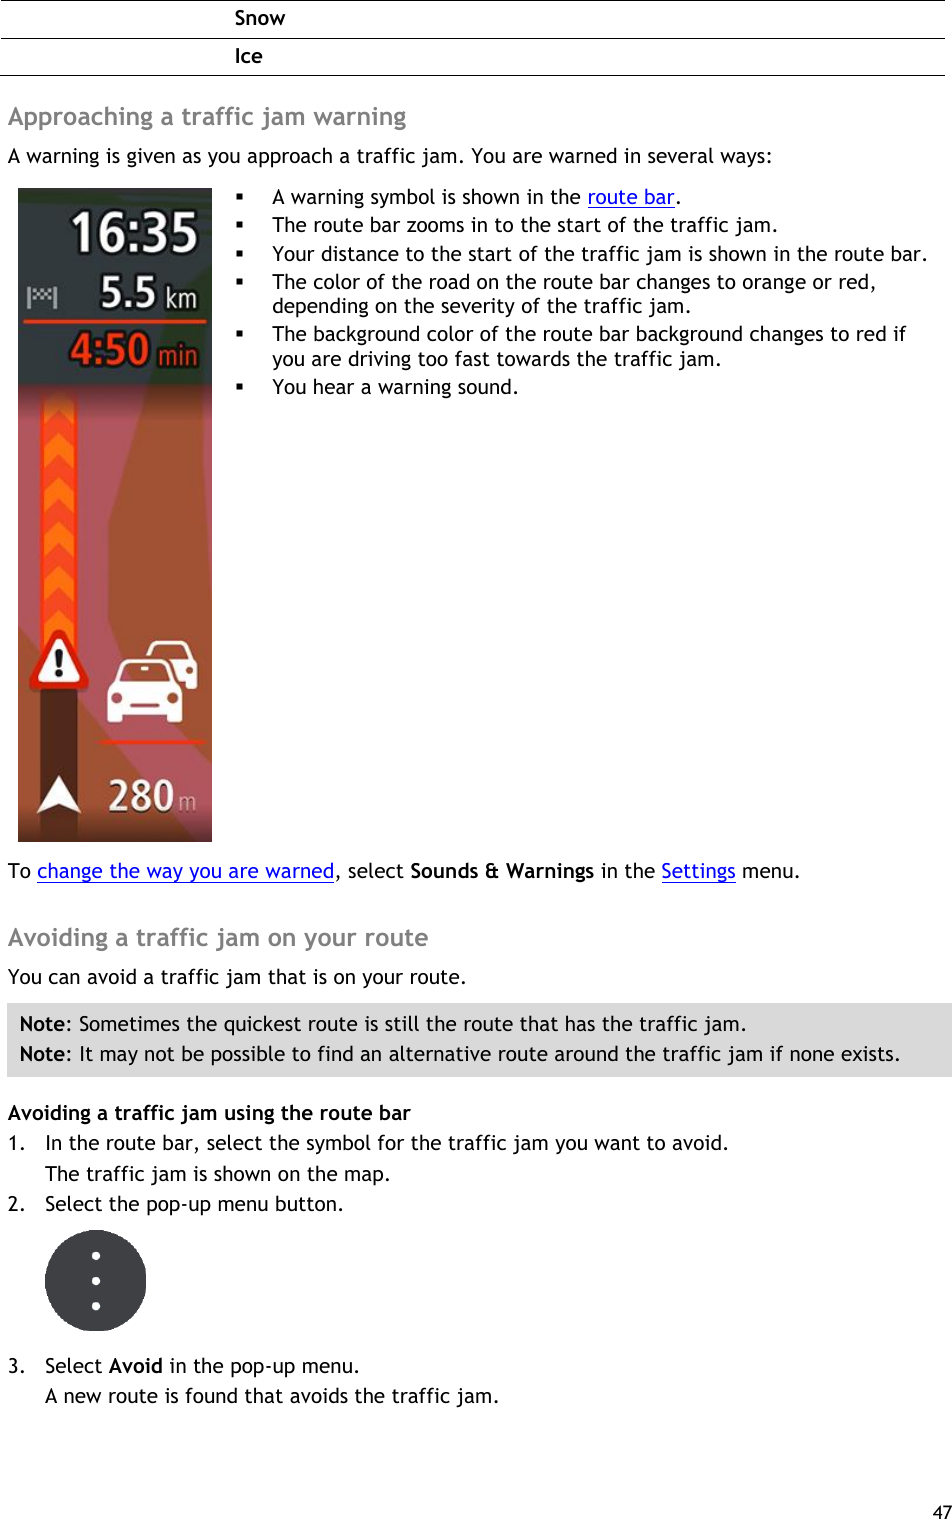  47   Snow  Ice  Approaching a traffic jam warning A warning is given as you approach a traffic jam. You are warned in several ways:     A warning symbol is shown in the route bar.  The route bar zooms in to the start of the traffic jam.  Your distance to the start of the traffic jam is shown in the route bar.  The color of the road on the route bar changes to orange or red, depending on the severity of the traffic jam.  The background color of the route bar background changes to red if you are driving too fast towards the traffic jam.  You hear a warning sound. To change the way you are warned, select Sounds &amp; Warnings in the Settings menu.  Avoiding a traffic jam on your route You can avoid a traffic jam that is on your route. Note: Sometimes the quickest route is still the route that has the traffic jam. Note: It may not be possible to find an alternative route around the traffic jam if none exists. Avoiding a traffic jam using the route bar 1. In the route bar, select the symbol for the traffic jam you want to avoid. The traffic jam is shown on the map. 2. Select the pop-up menu button.  3. Select Avoid in the pop-up menu. A new route is found that avoids the traffic jam. 